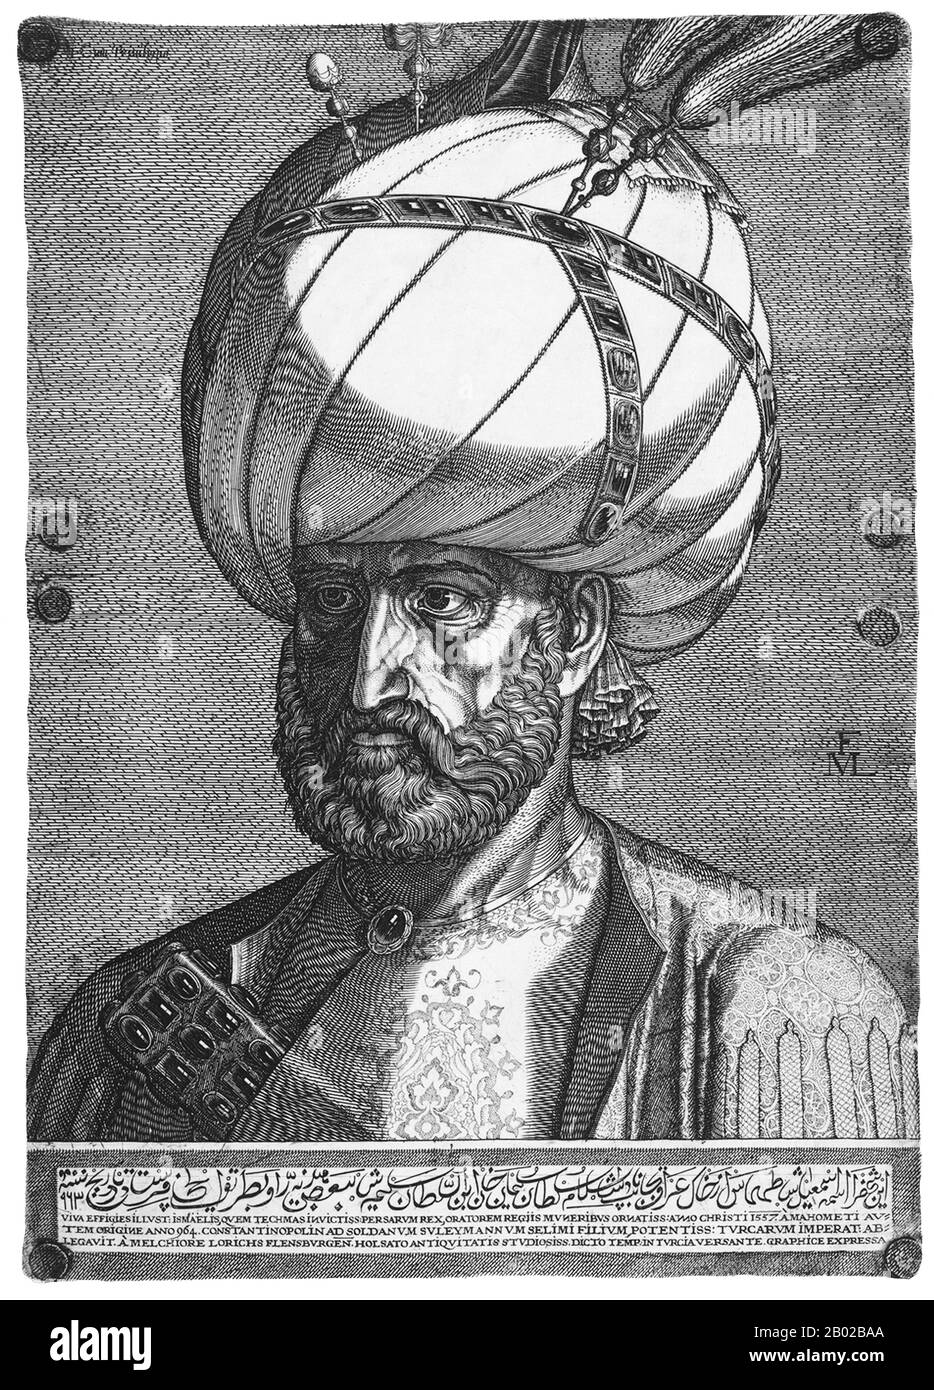 Ismāʻīl (later known as Ismāʻīl II), was a son of the 2nd Safavid ruler Shah Ṭahmāsp I (1524-1576) and a diplomatic representative to the court of the Ottoman Sultan Suleiman I. He became the 3rd Safavid ruler of Iran in 1576 on the death of his father. Stock Photo